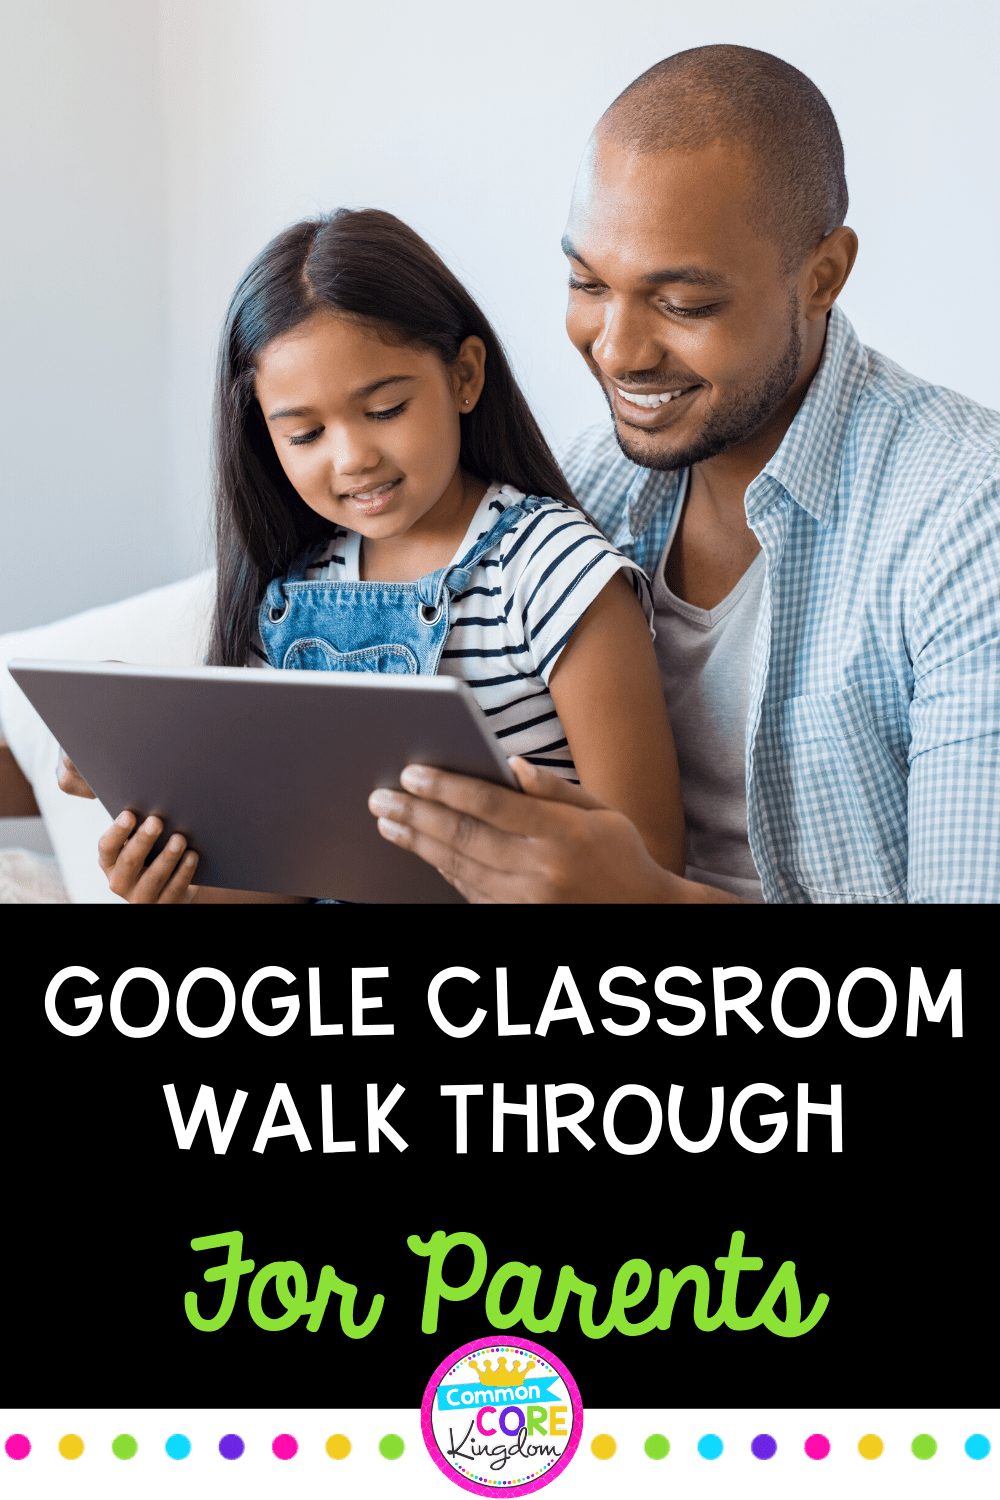 Father and daughter looking at ipad smiling with text saying google classroom walk through for parents